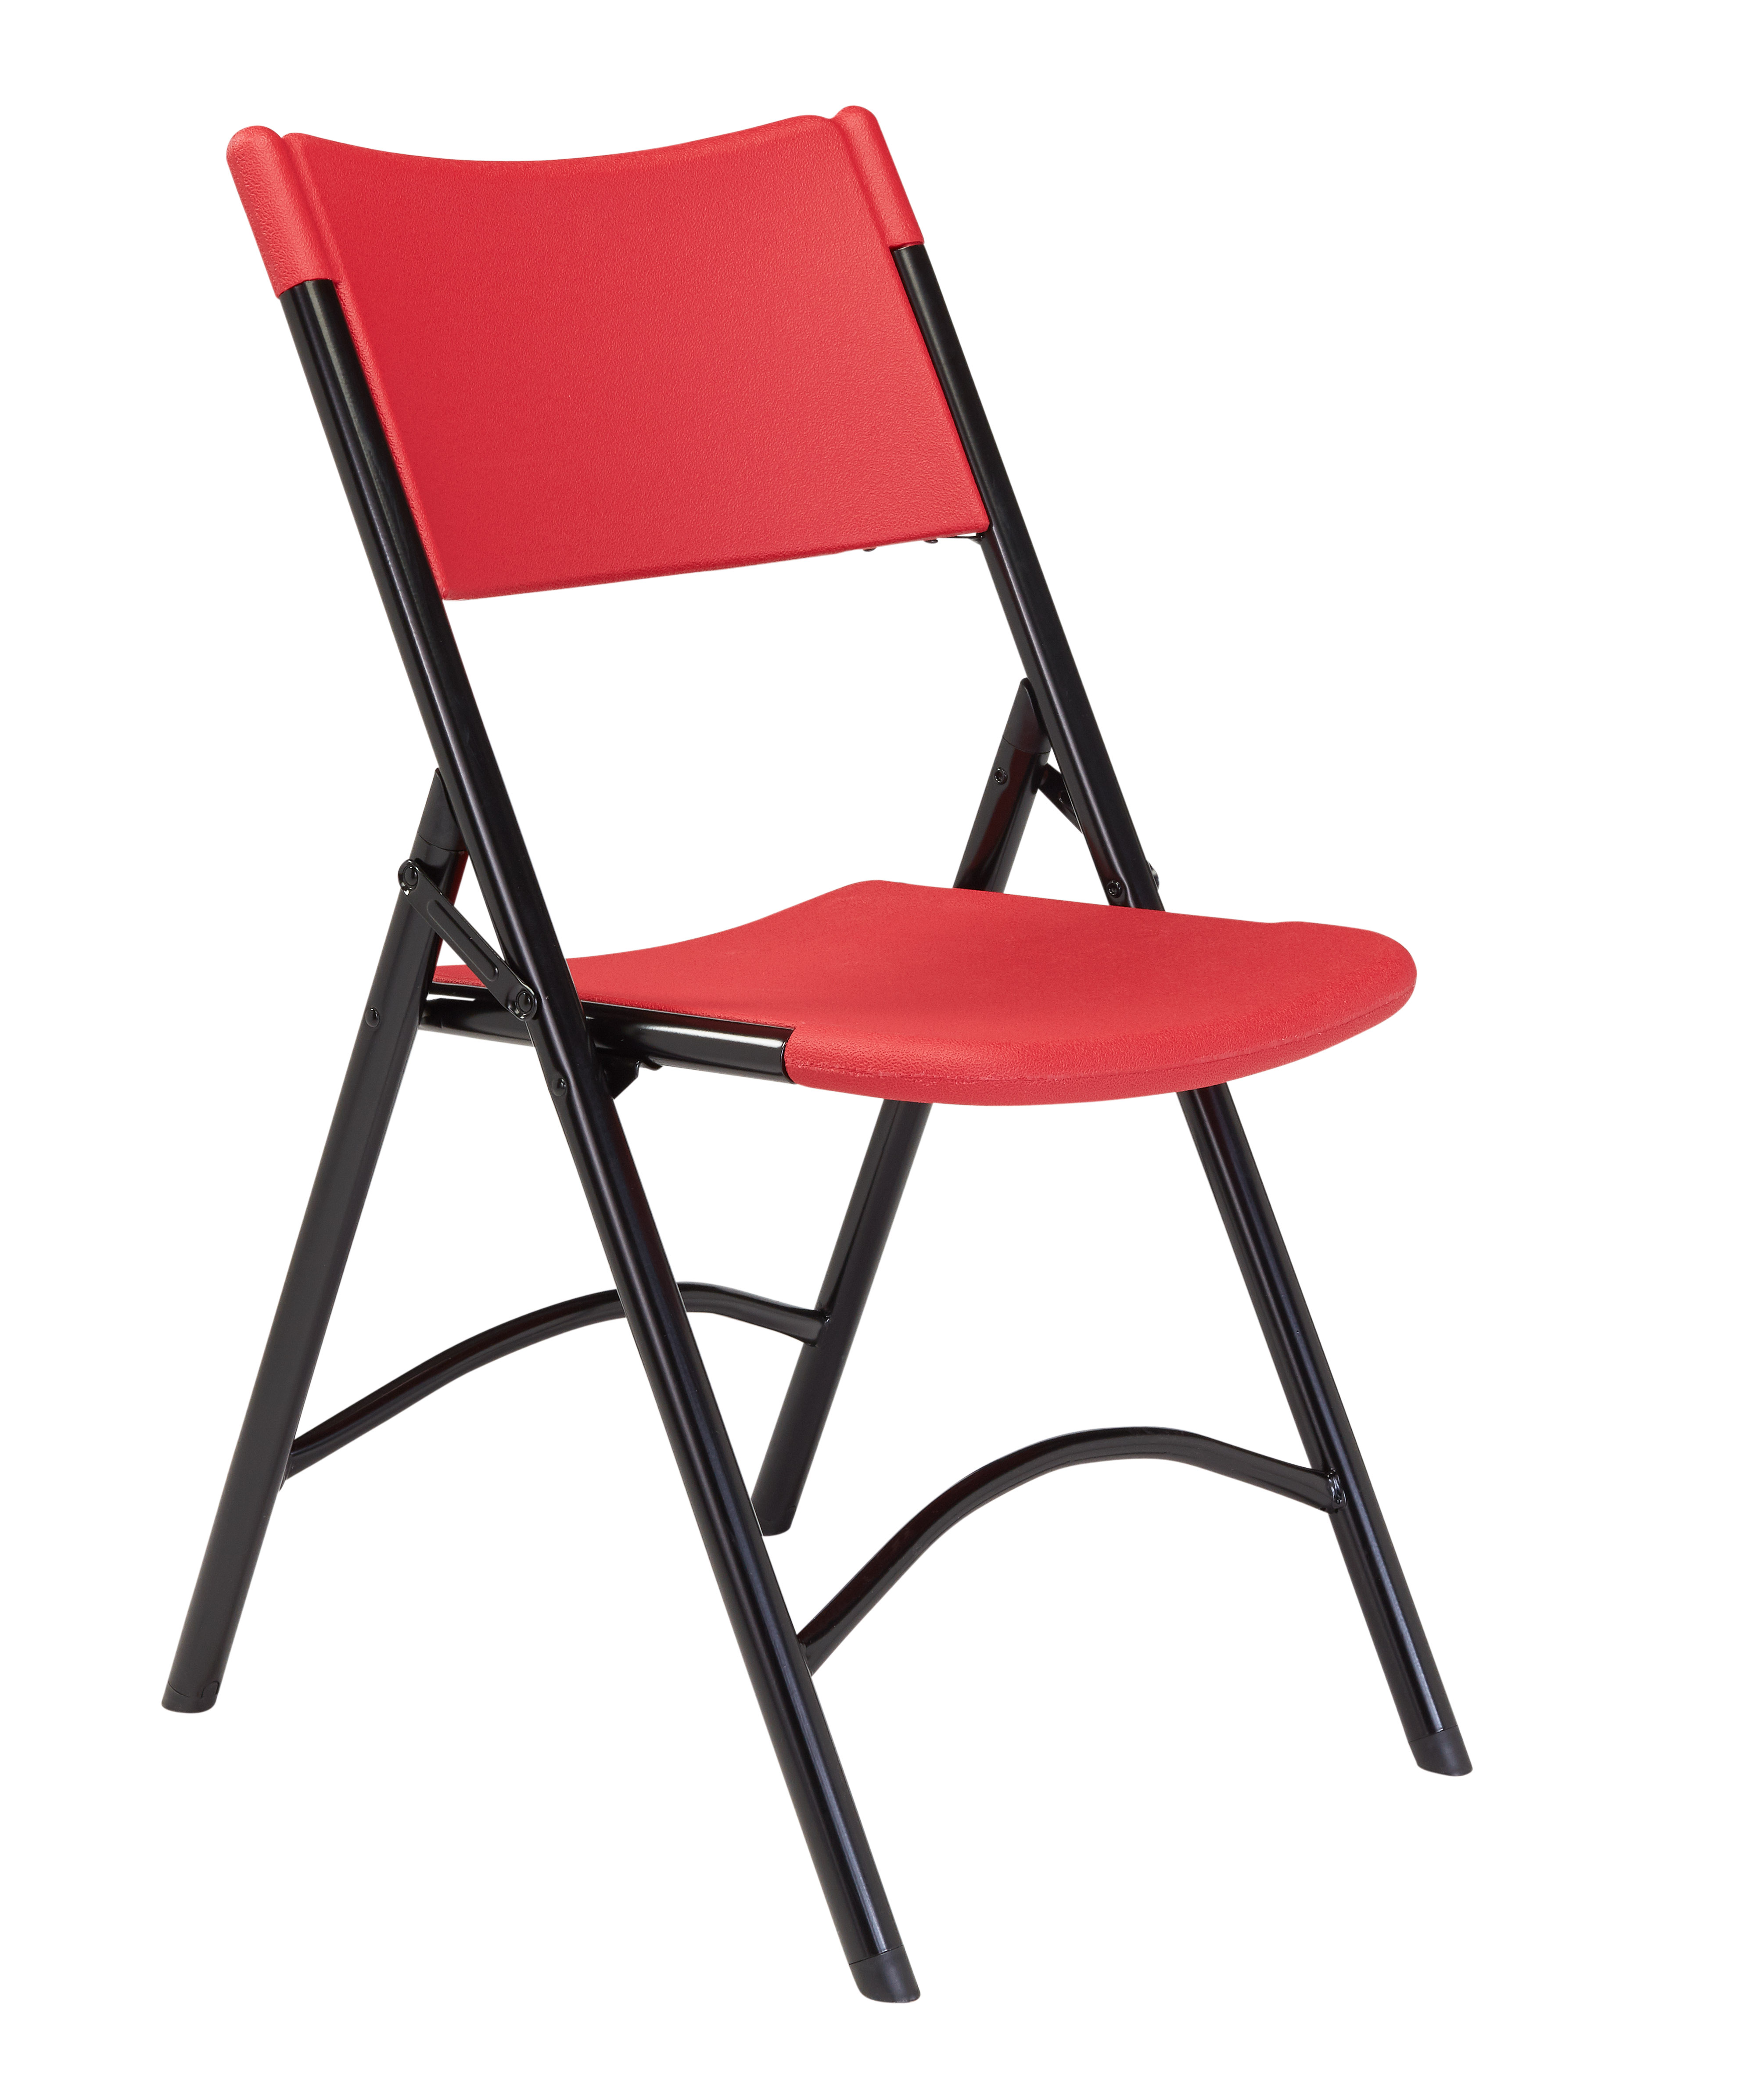 NPS 640 Blow Mold Folding Chair, Red